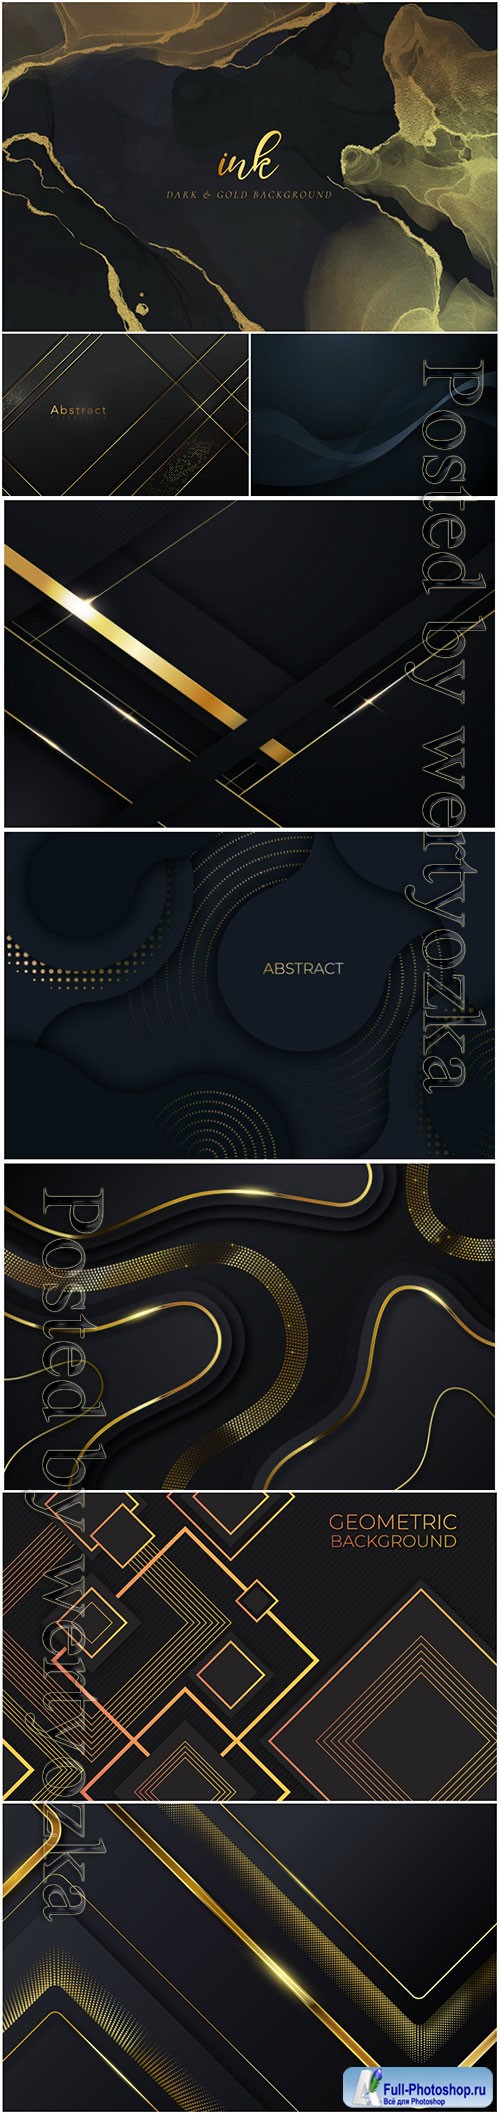 Luxury abstract backgrounds in vector # 5